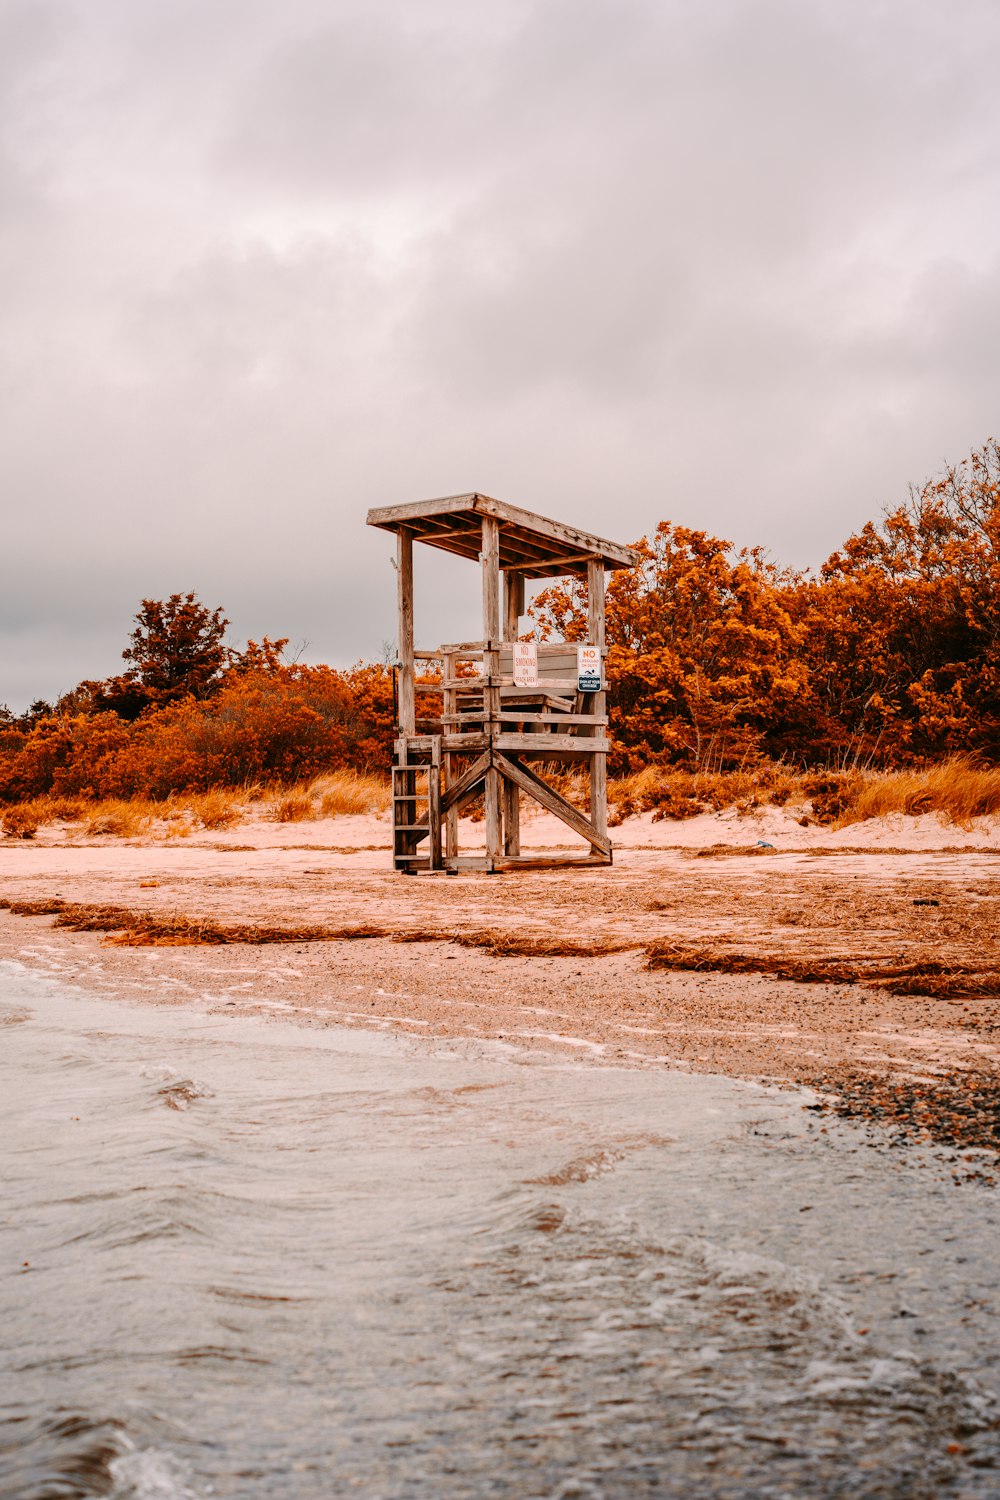 a life guard stand on the beach near the water